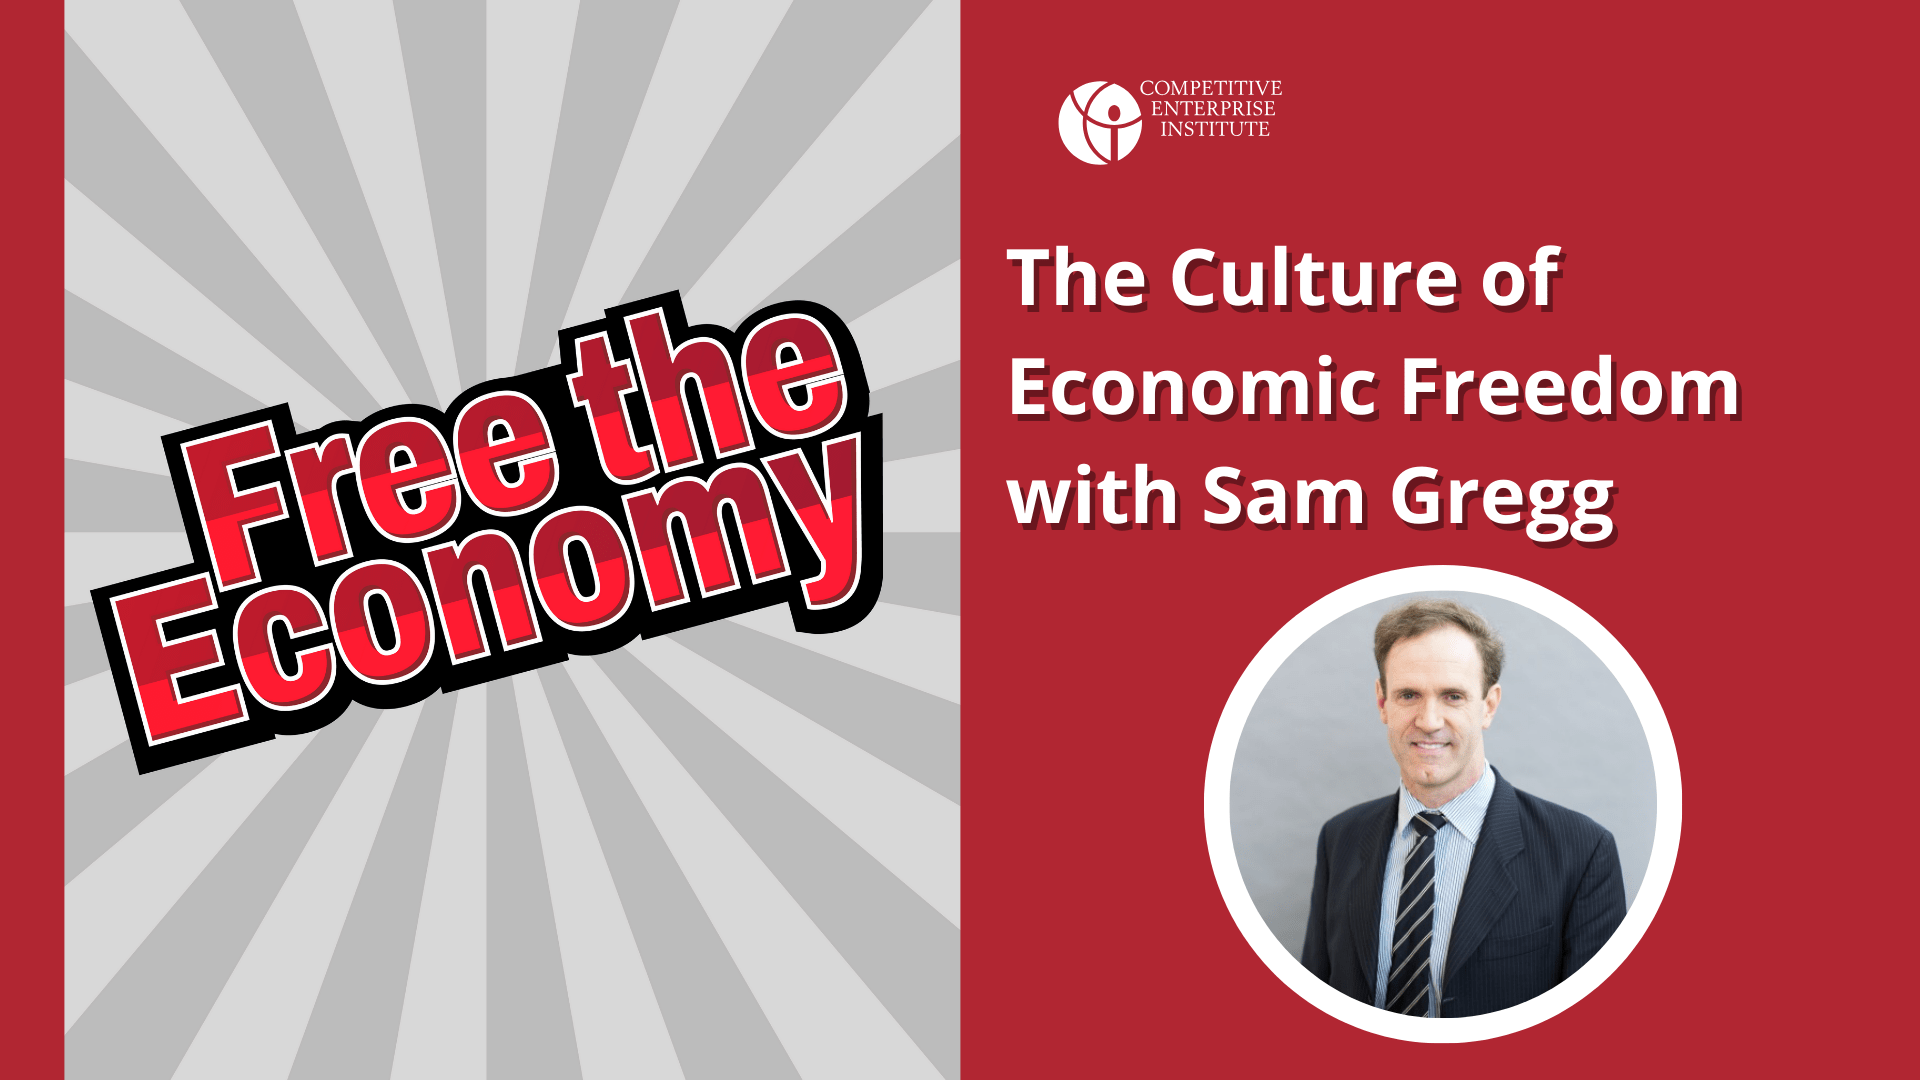 The Culture of Economic Freedom with Sam Gregg